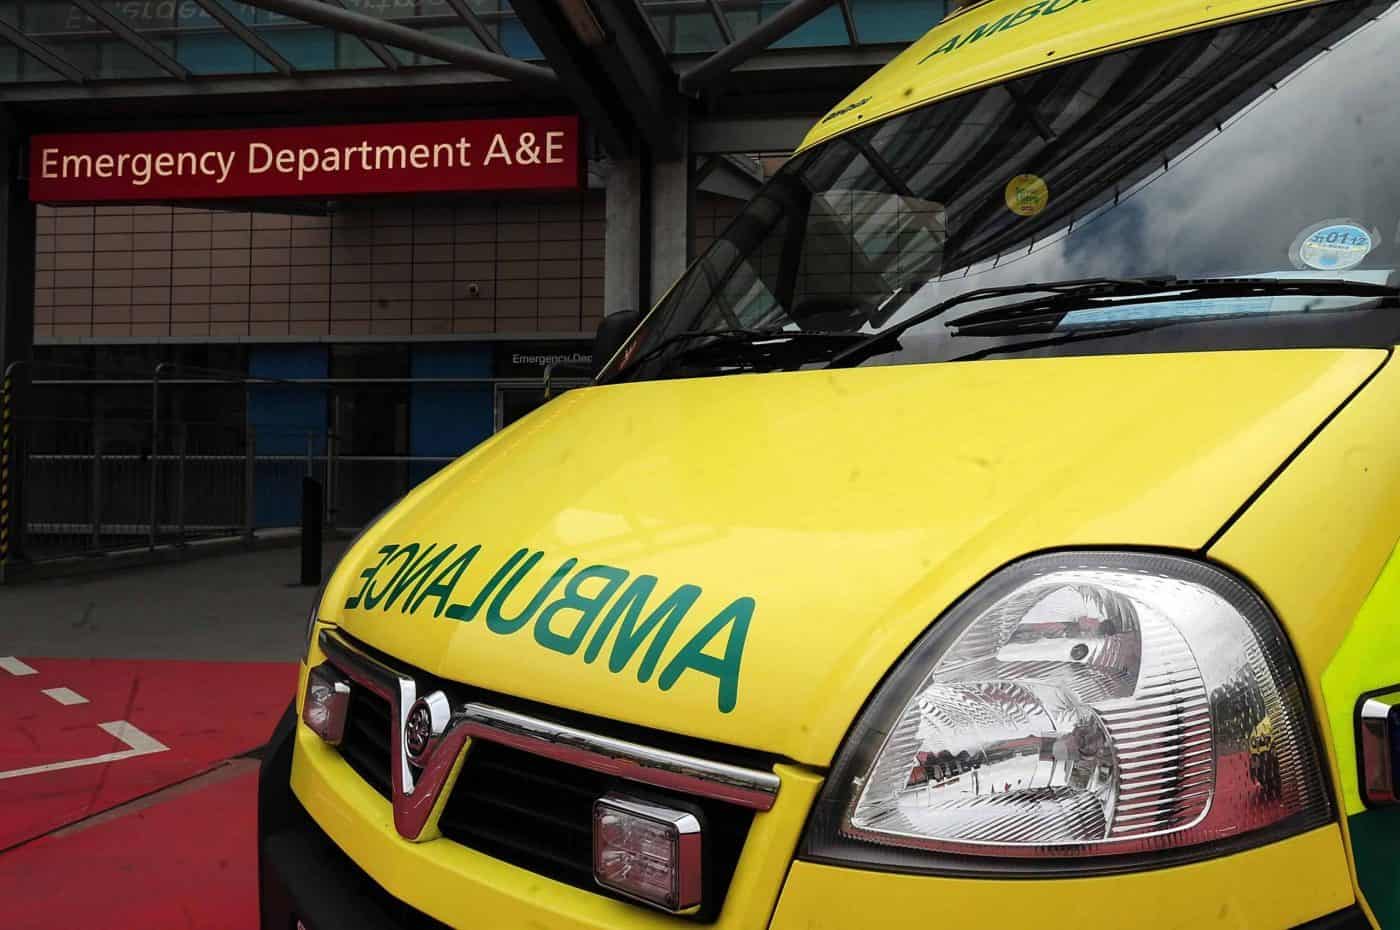 Armed forces to drive ambulances to help NHS trusts